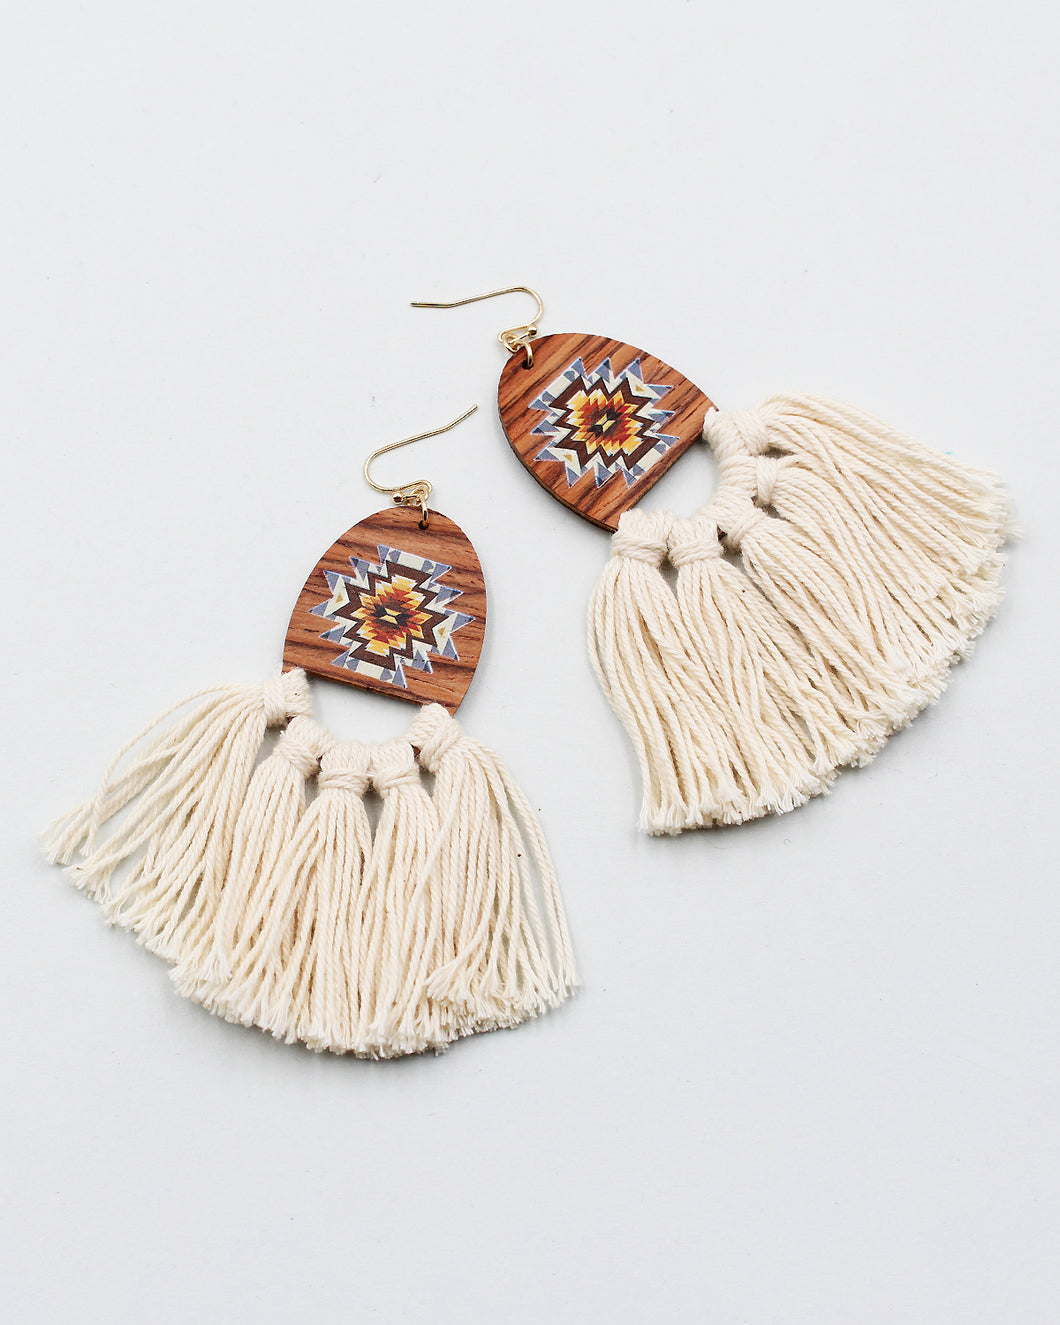 Western Wood Top Earrings with Cotton Fringe